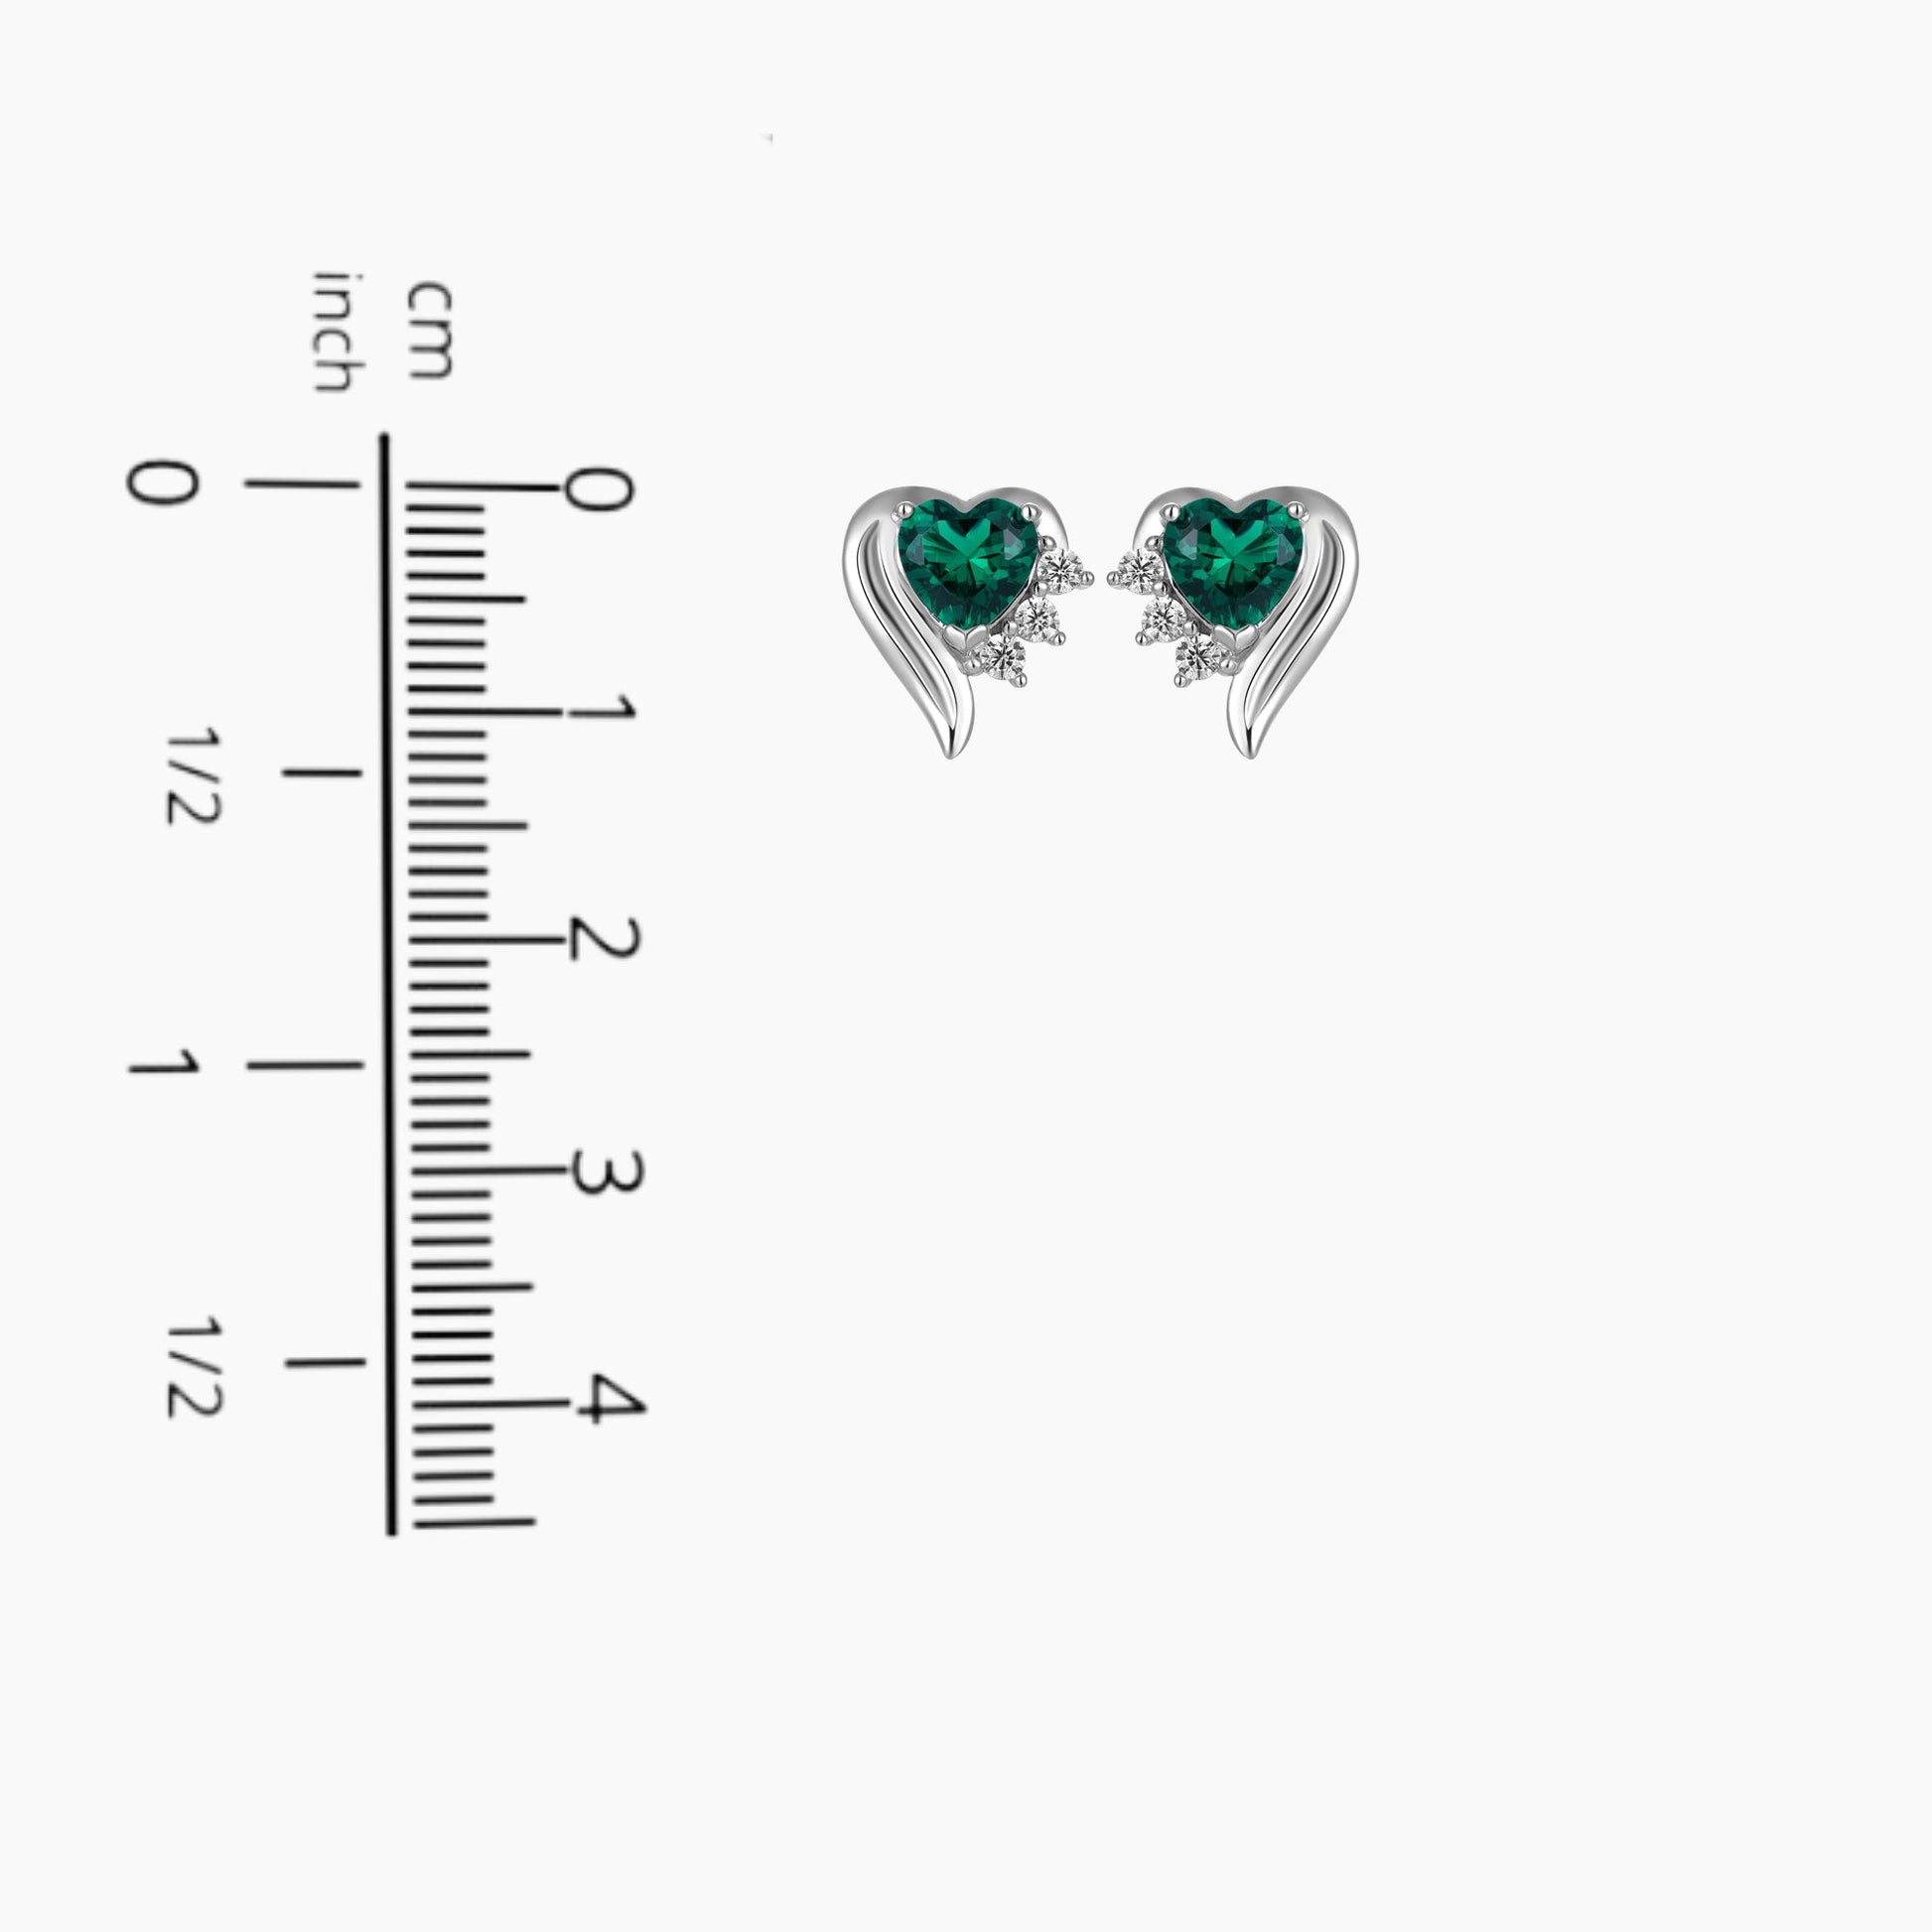 Silver emerald heart shape stud earrings next to scale for size comparison